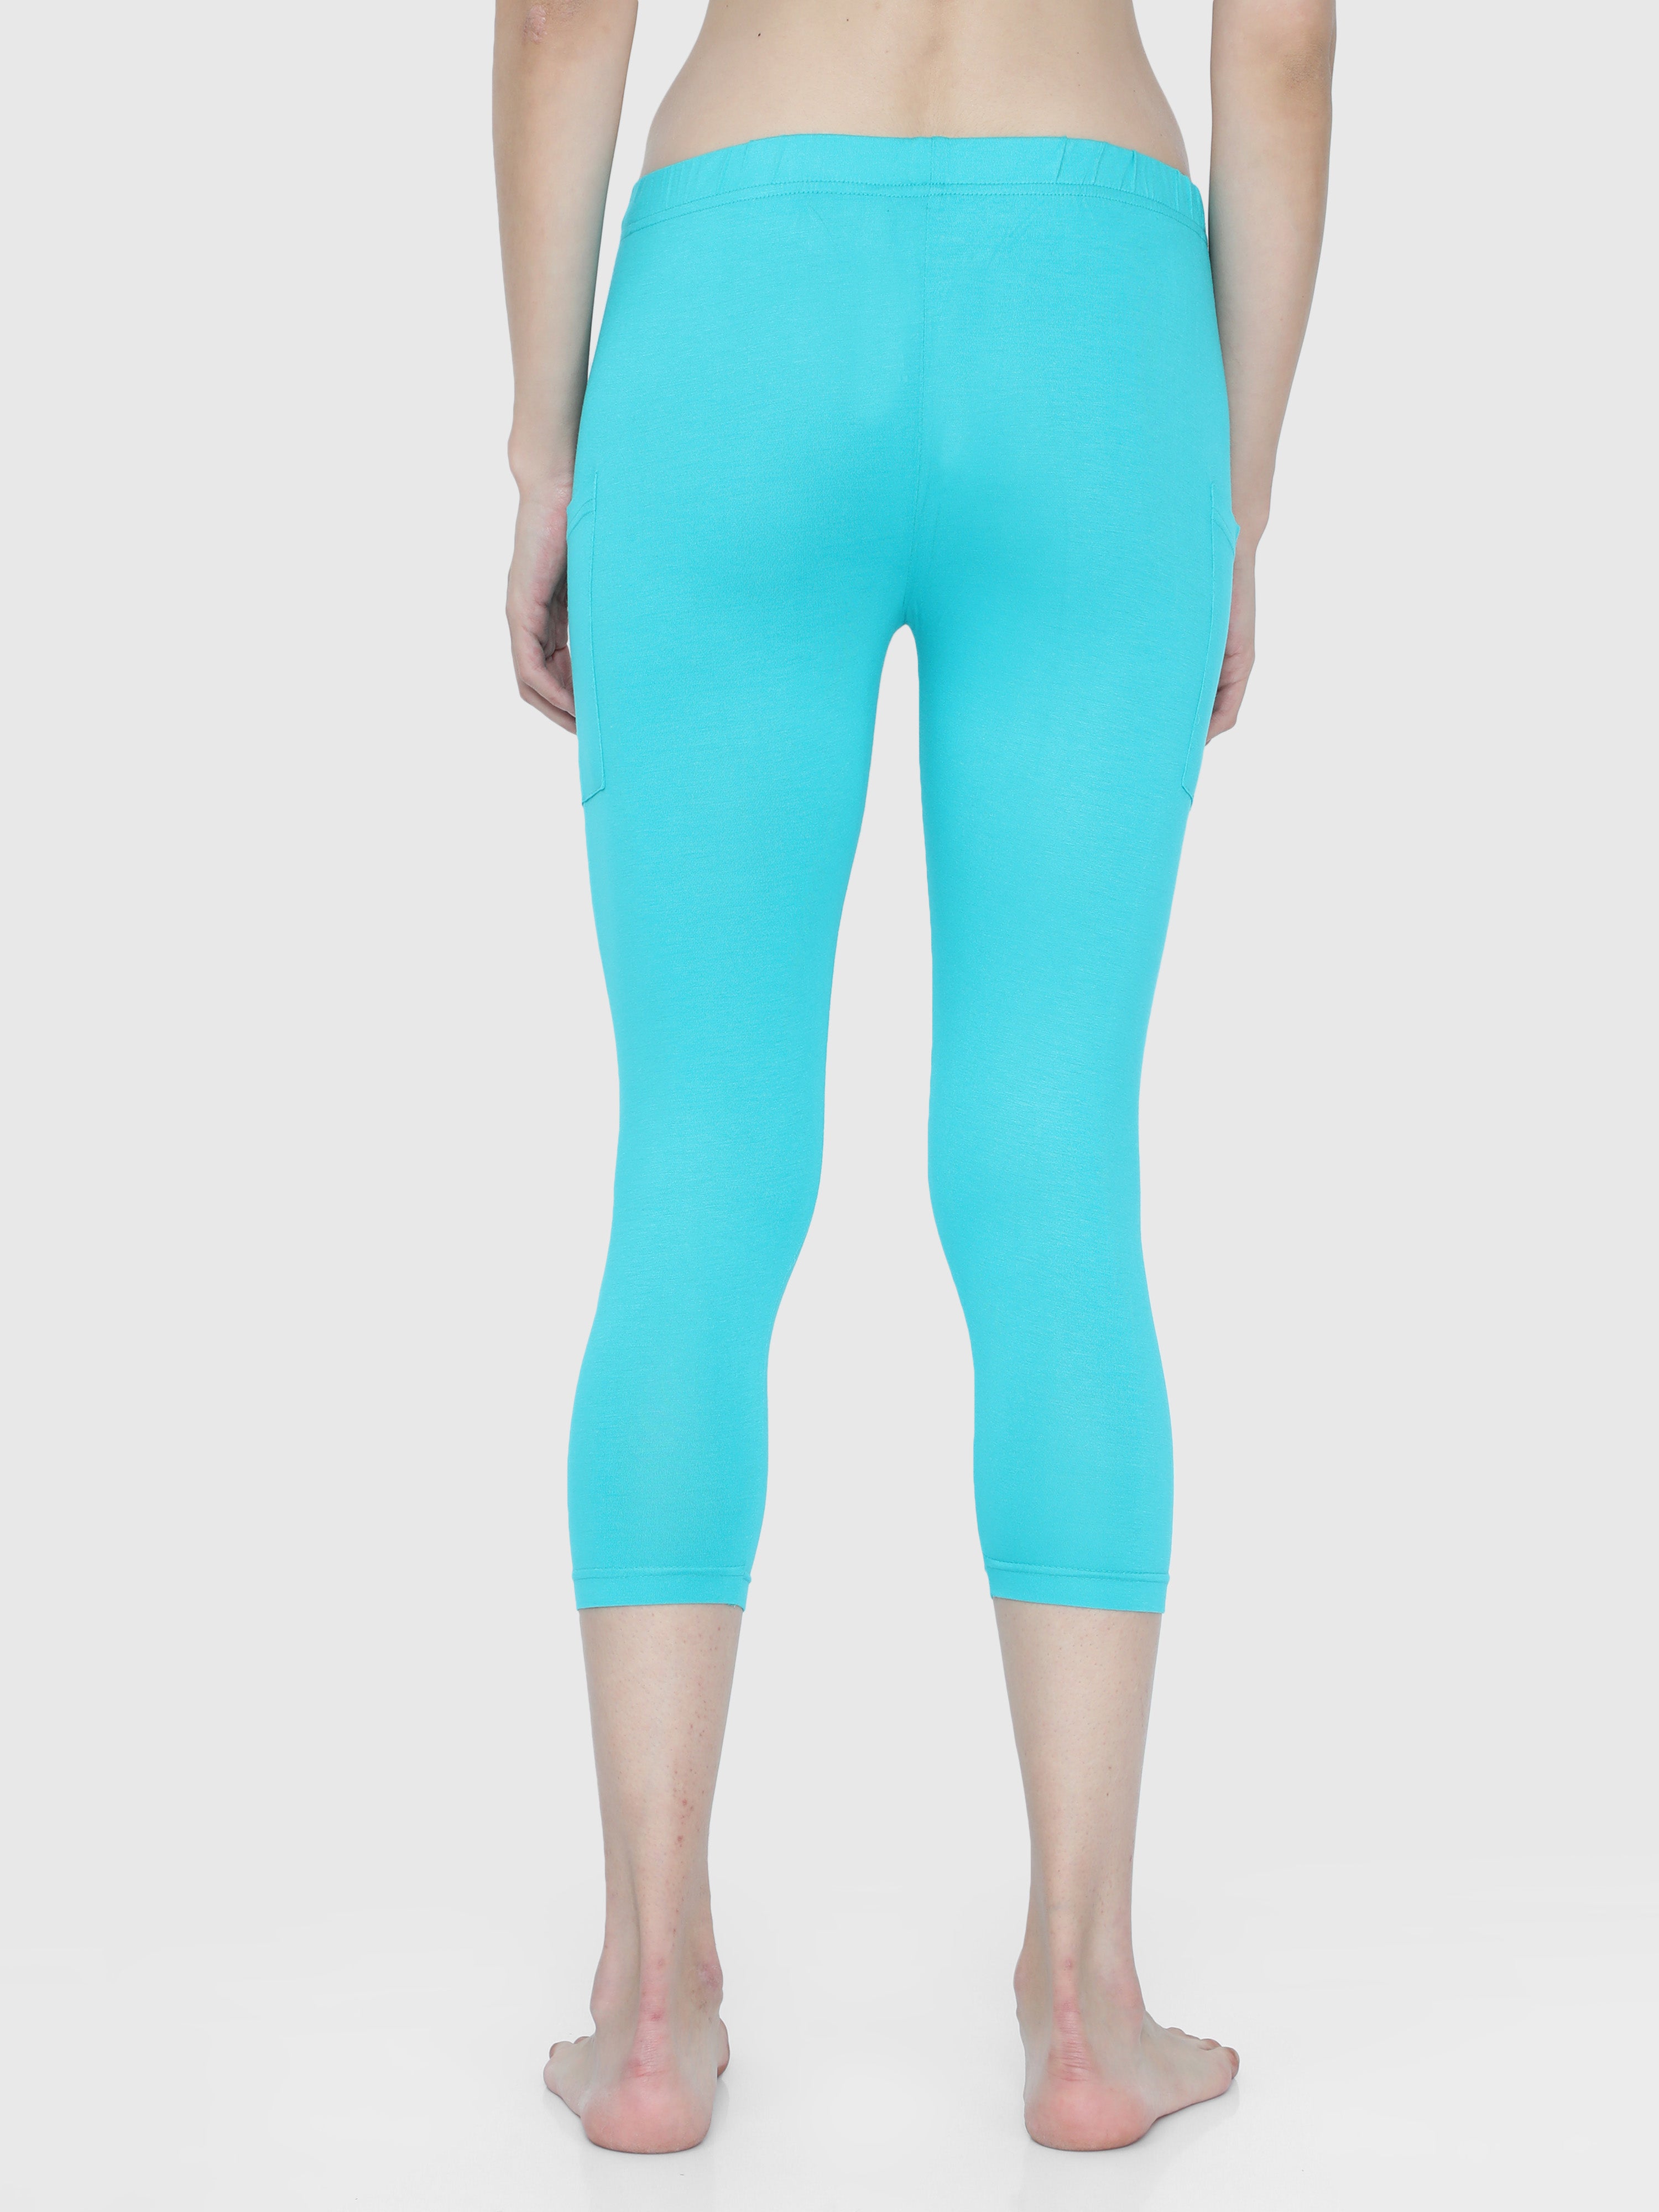 XS (UK 6) SIZE ONLY Leggings in Iona Blue - Recycled Nylon (Devanha) -  Ghillied Clothing